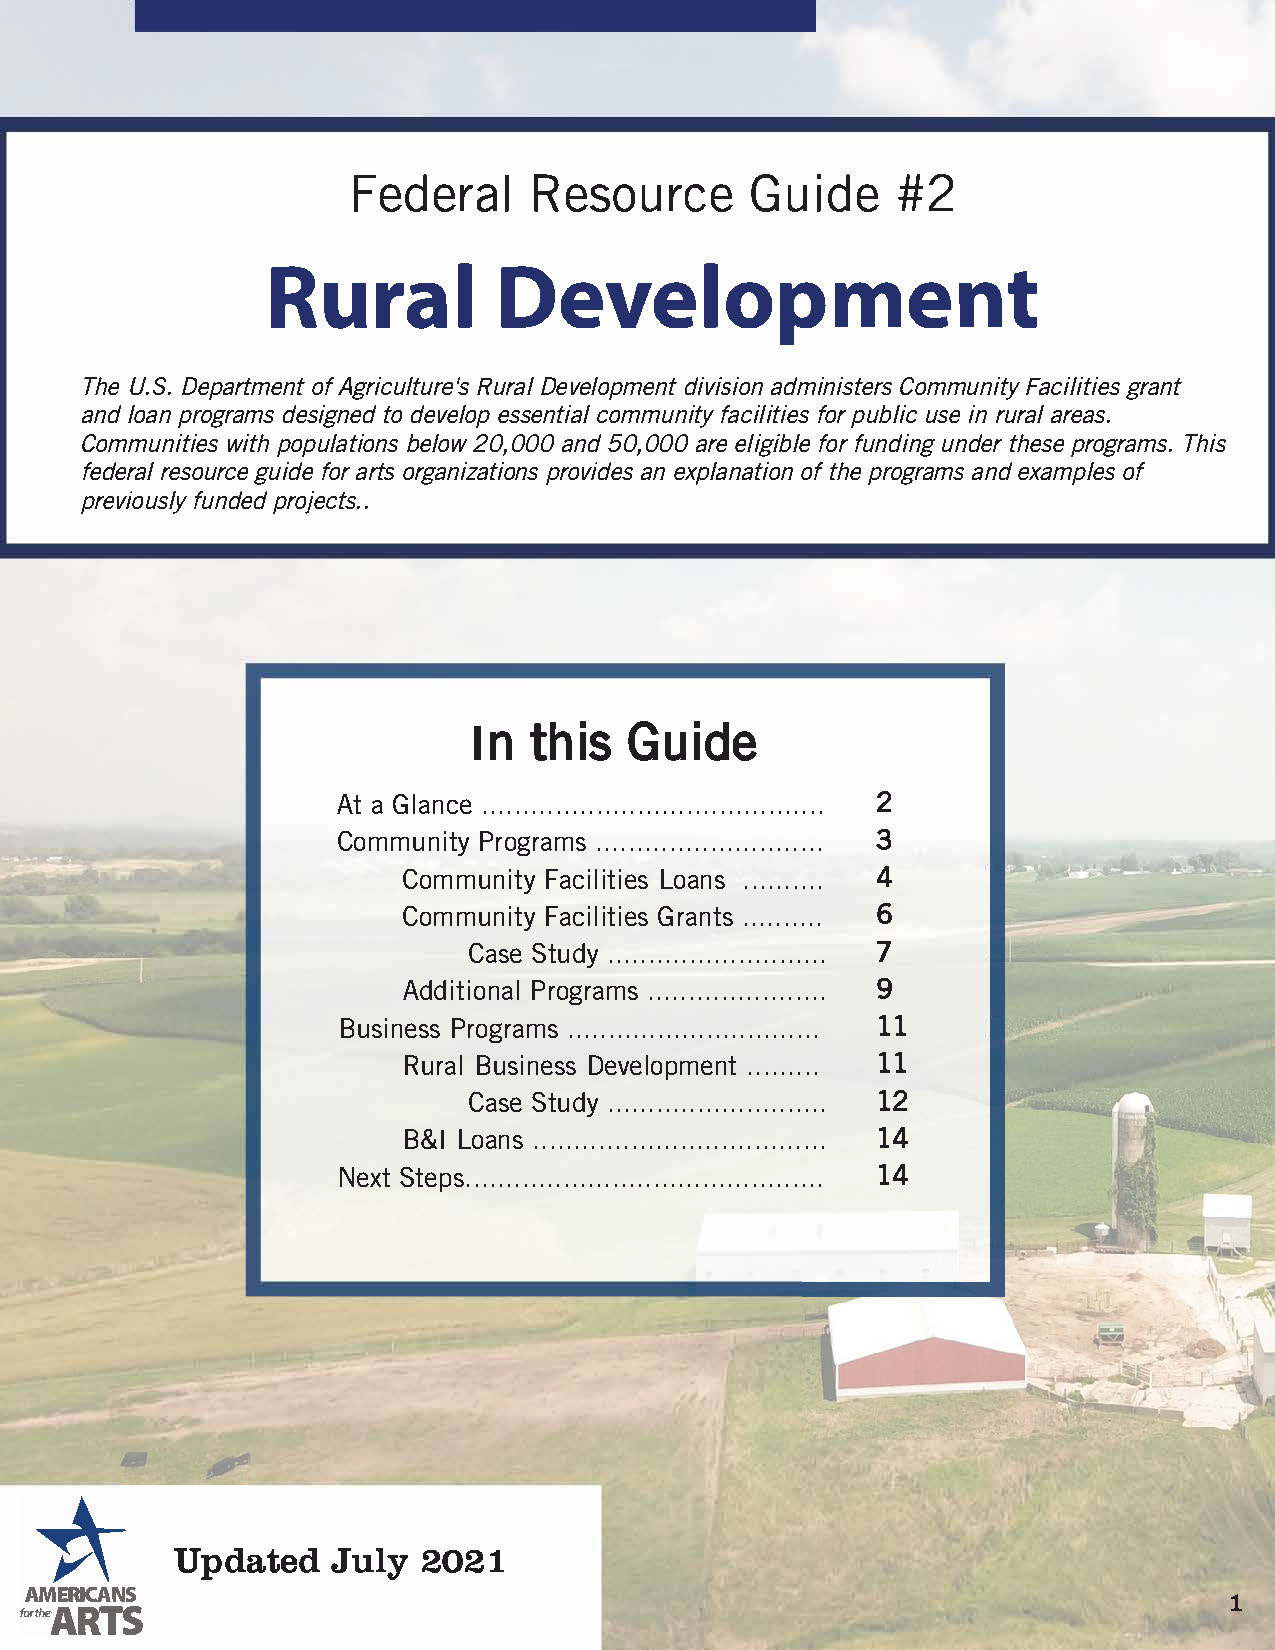 A thumnail cover image of the Rural Development guide, featuring an image of a farm and a rolling field